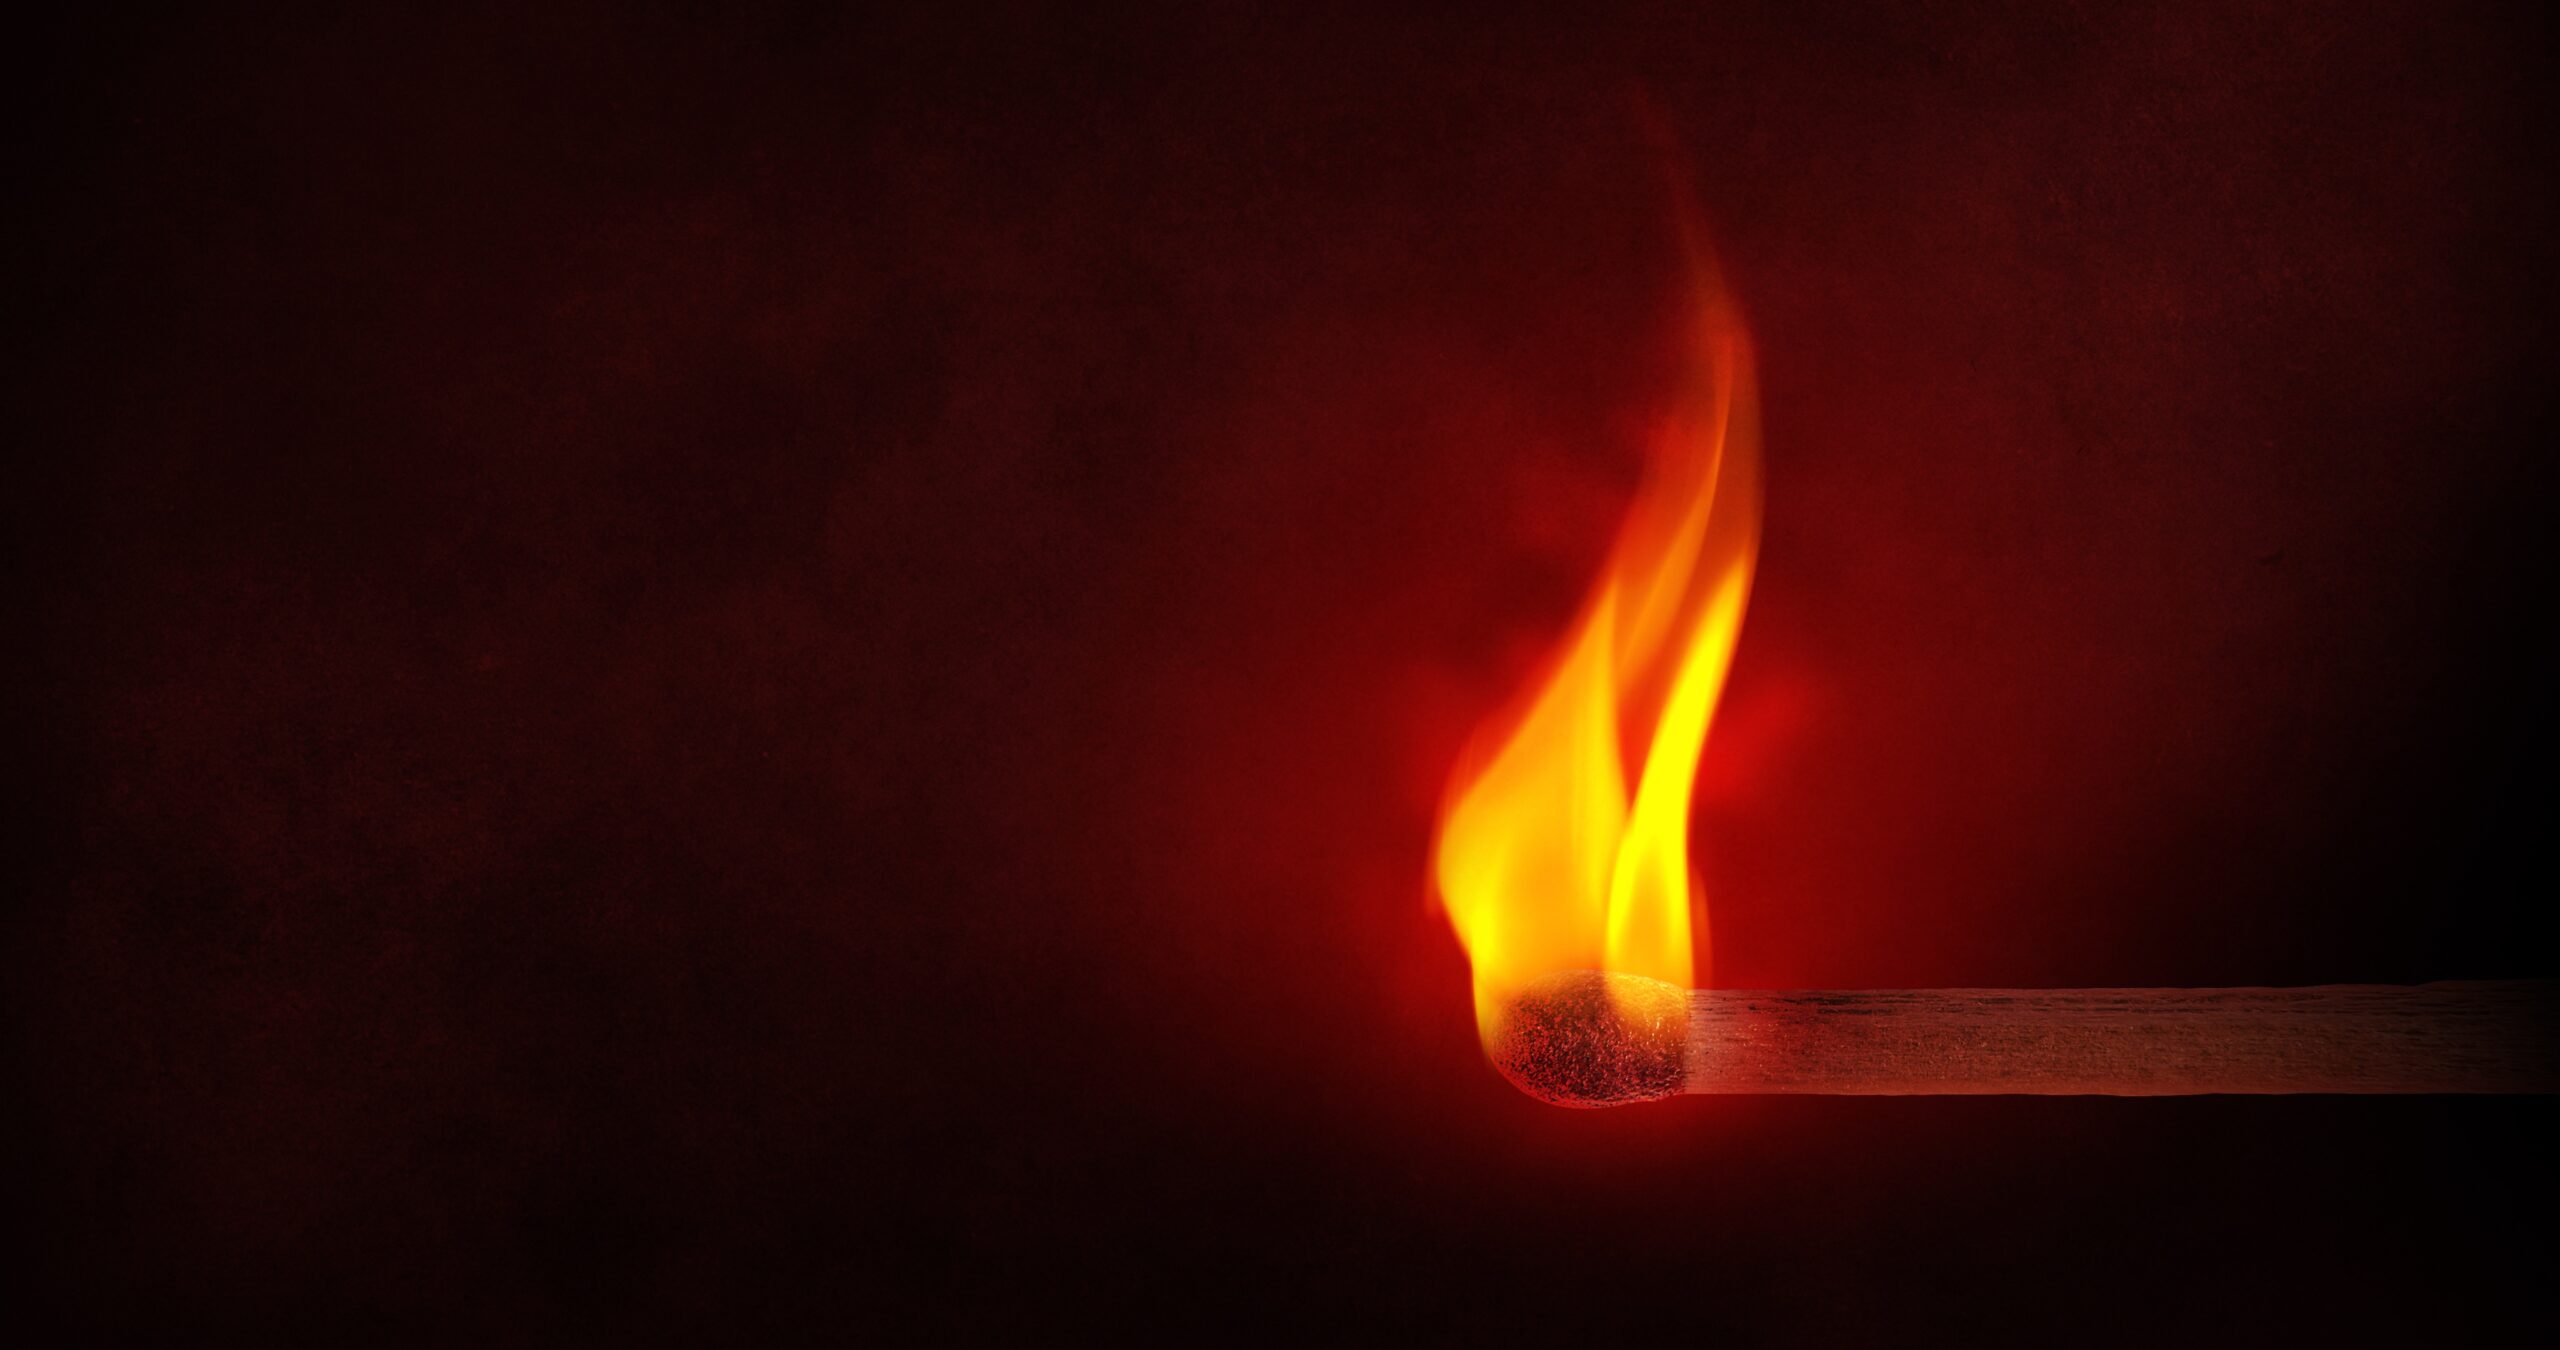 Download wallpapers match, fire, flame, sulfur 2K backgrounds